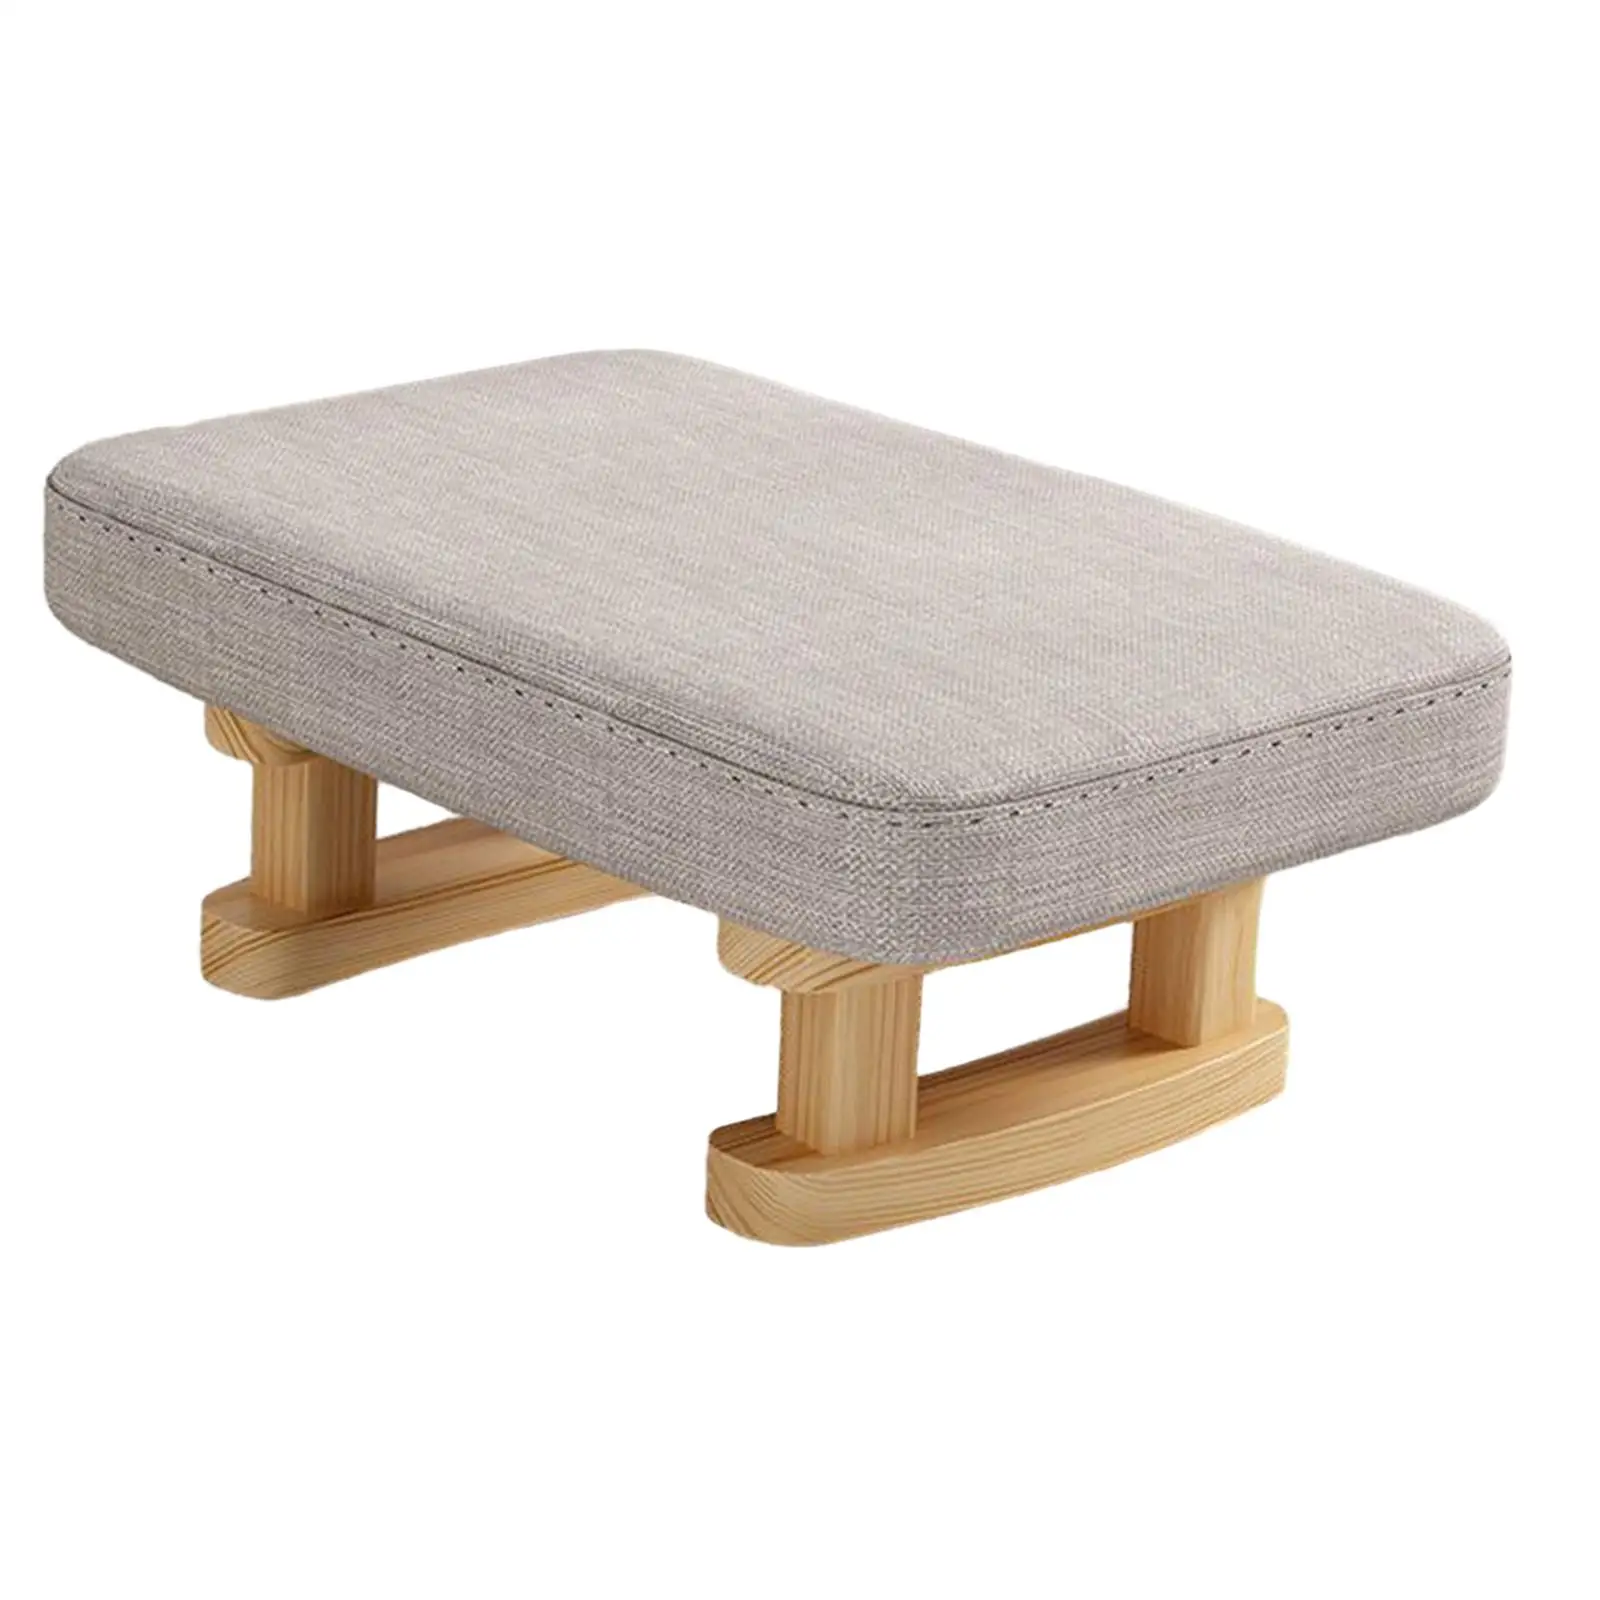 Foot Rest with Wooden Legs Bench 41x30x18cm/16.14x11.81x7.09inch Padded Footstool for Porch Dining Bedroom Guest Room Living